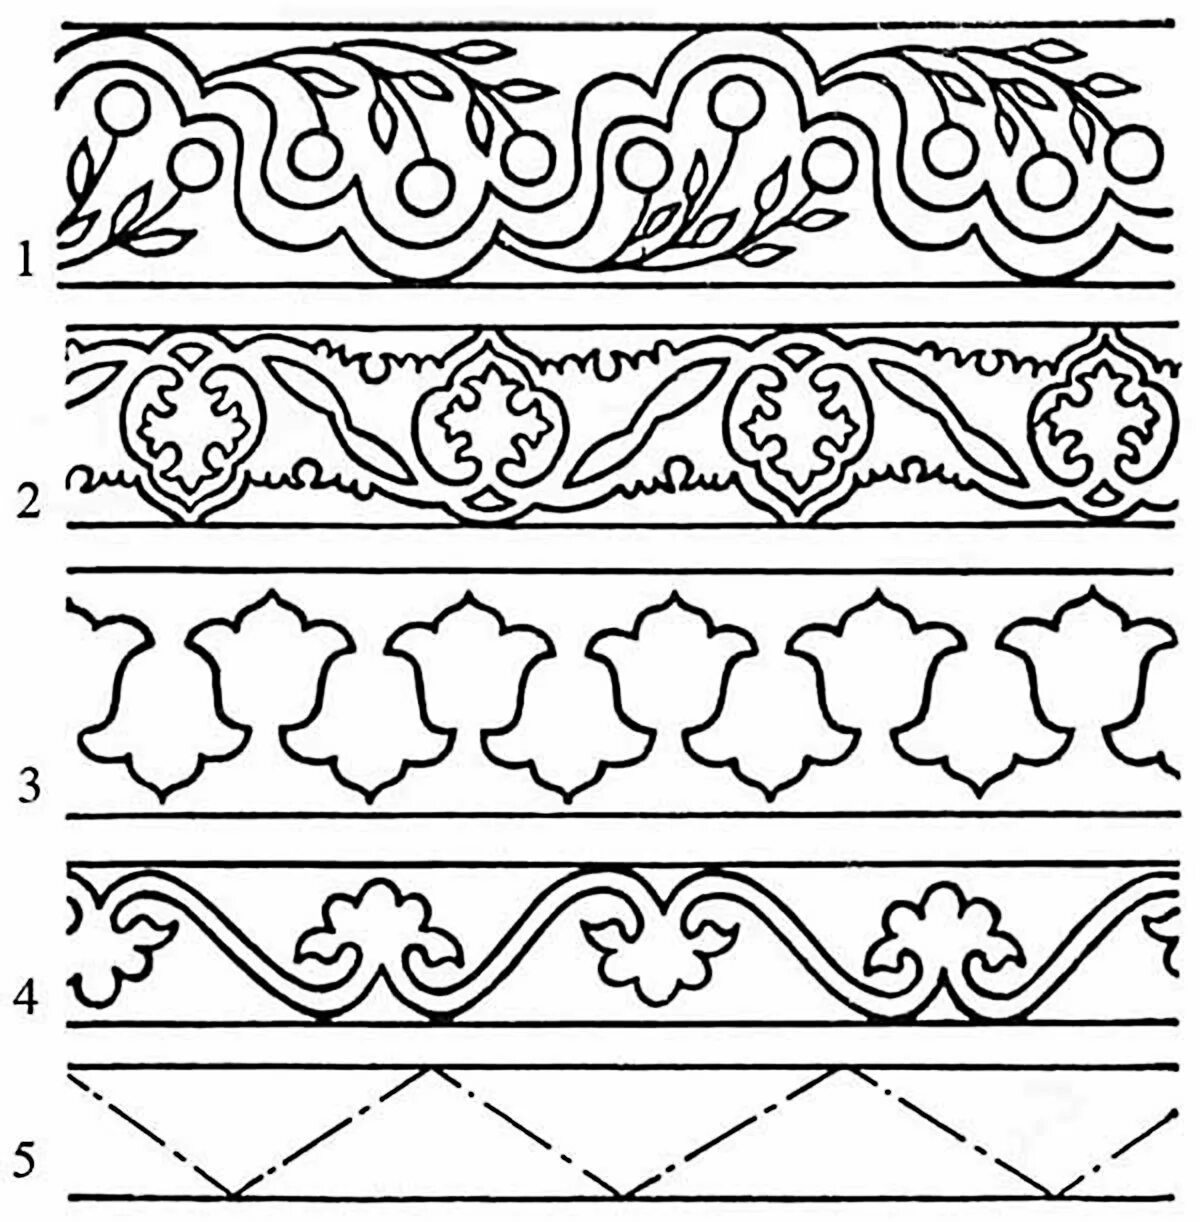 Exquisite tatar ornament coloring for kids